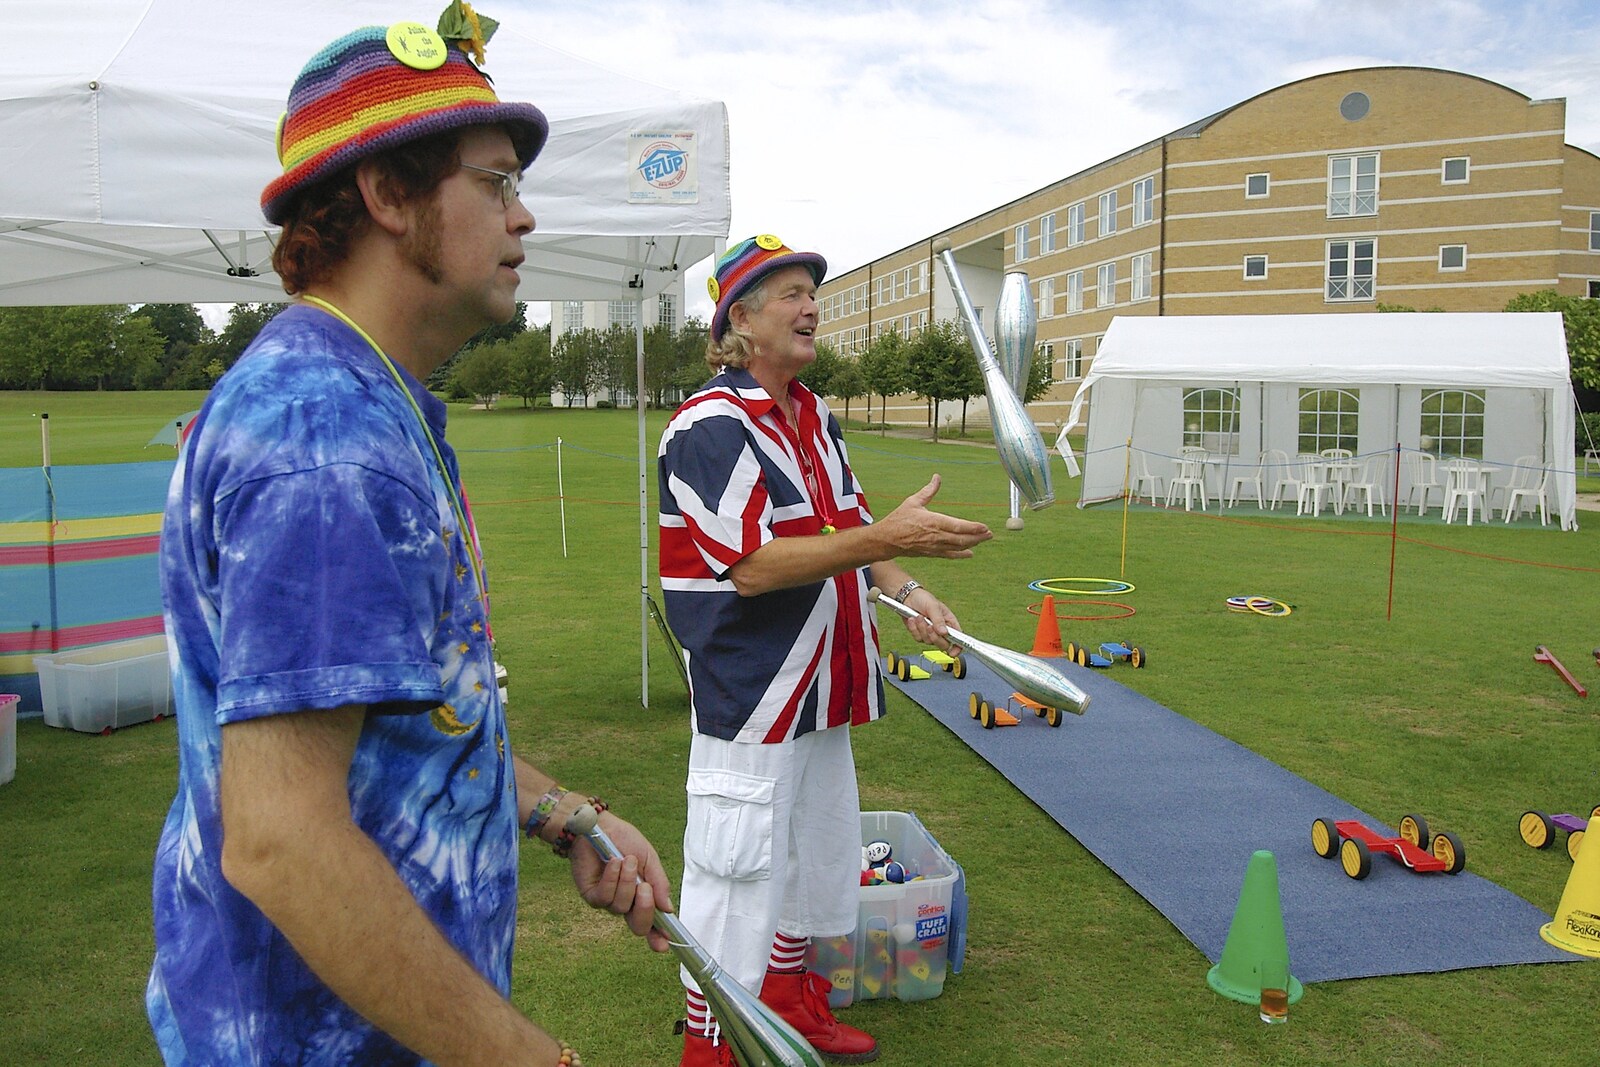 Juggling clubs from Qualcomm's Summer Circus Thrash, Churchill College, Cambridge - 18th August 2006